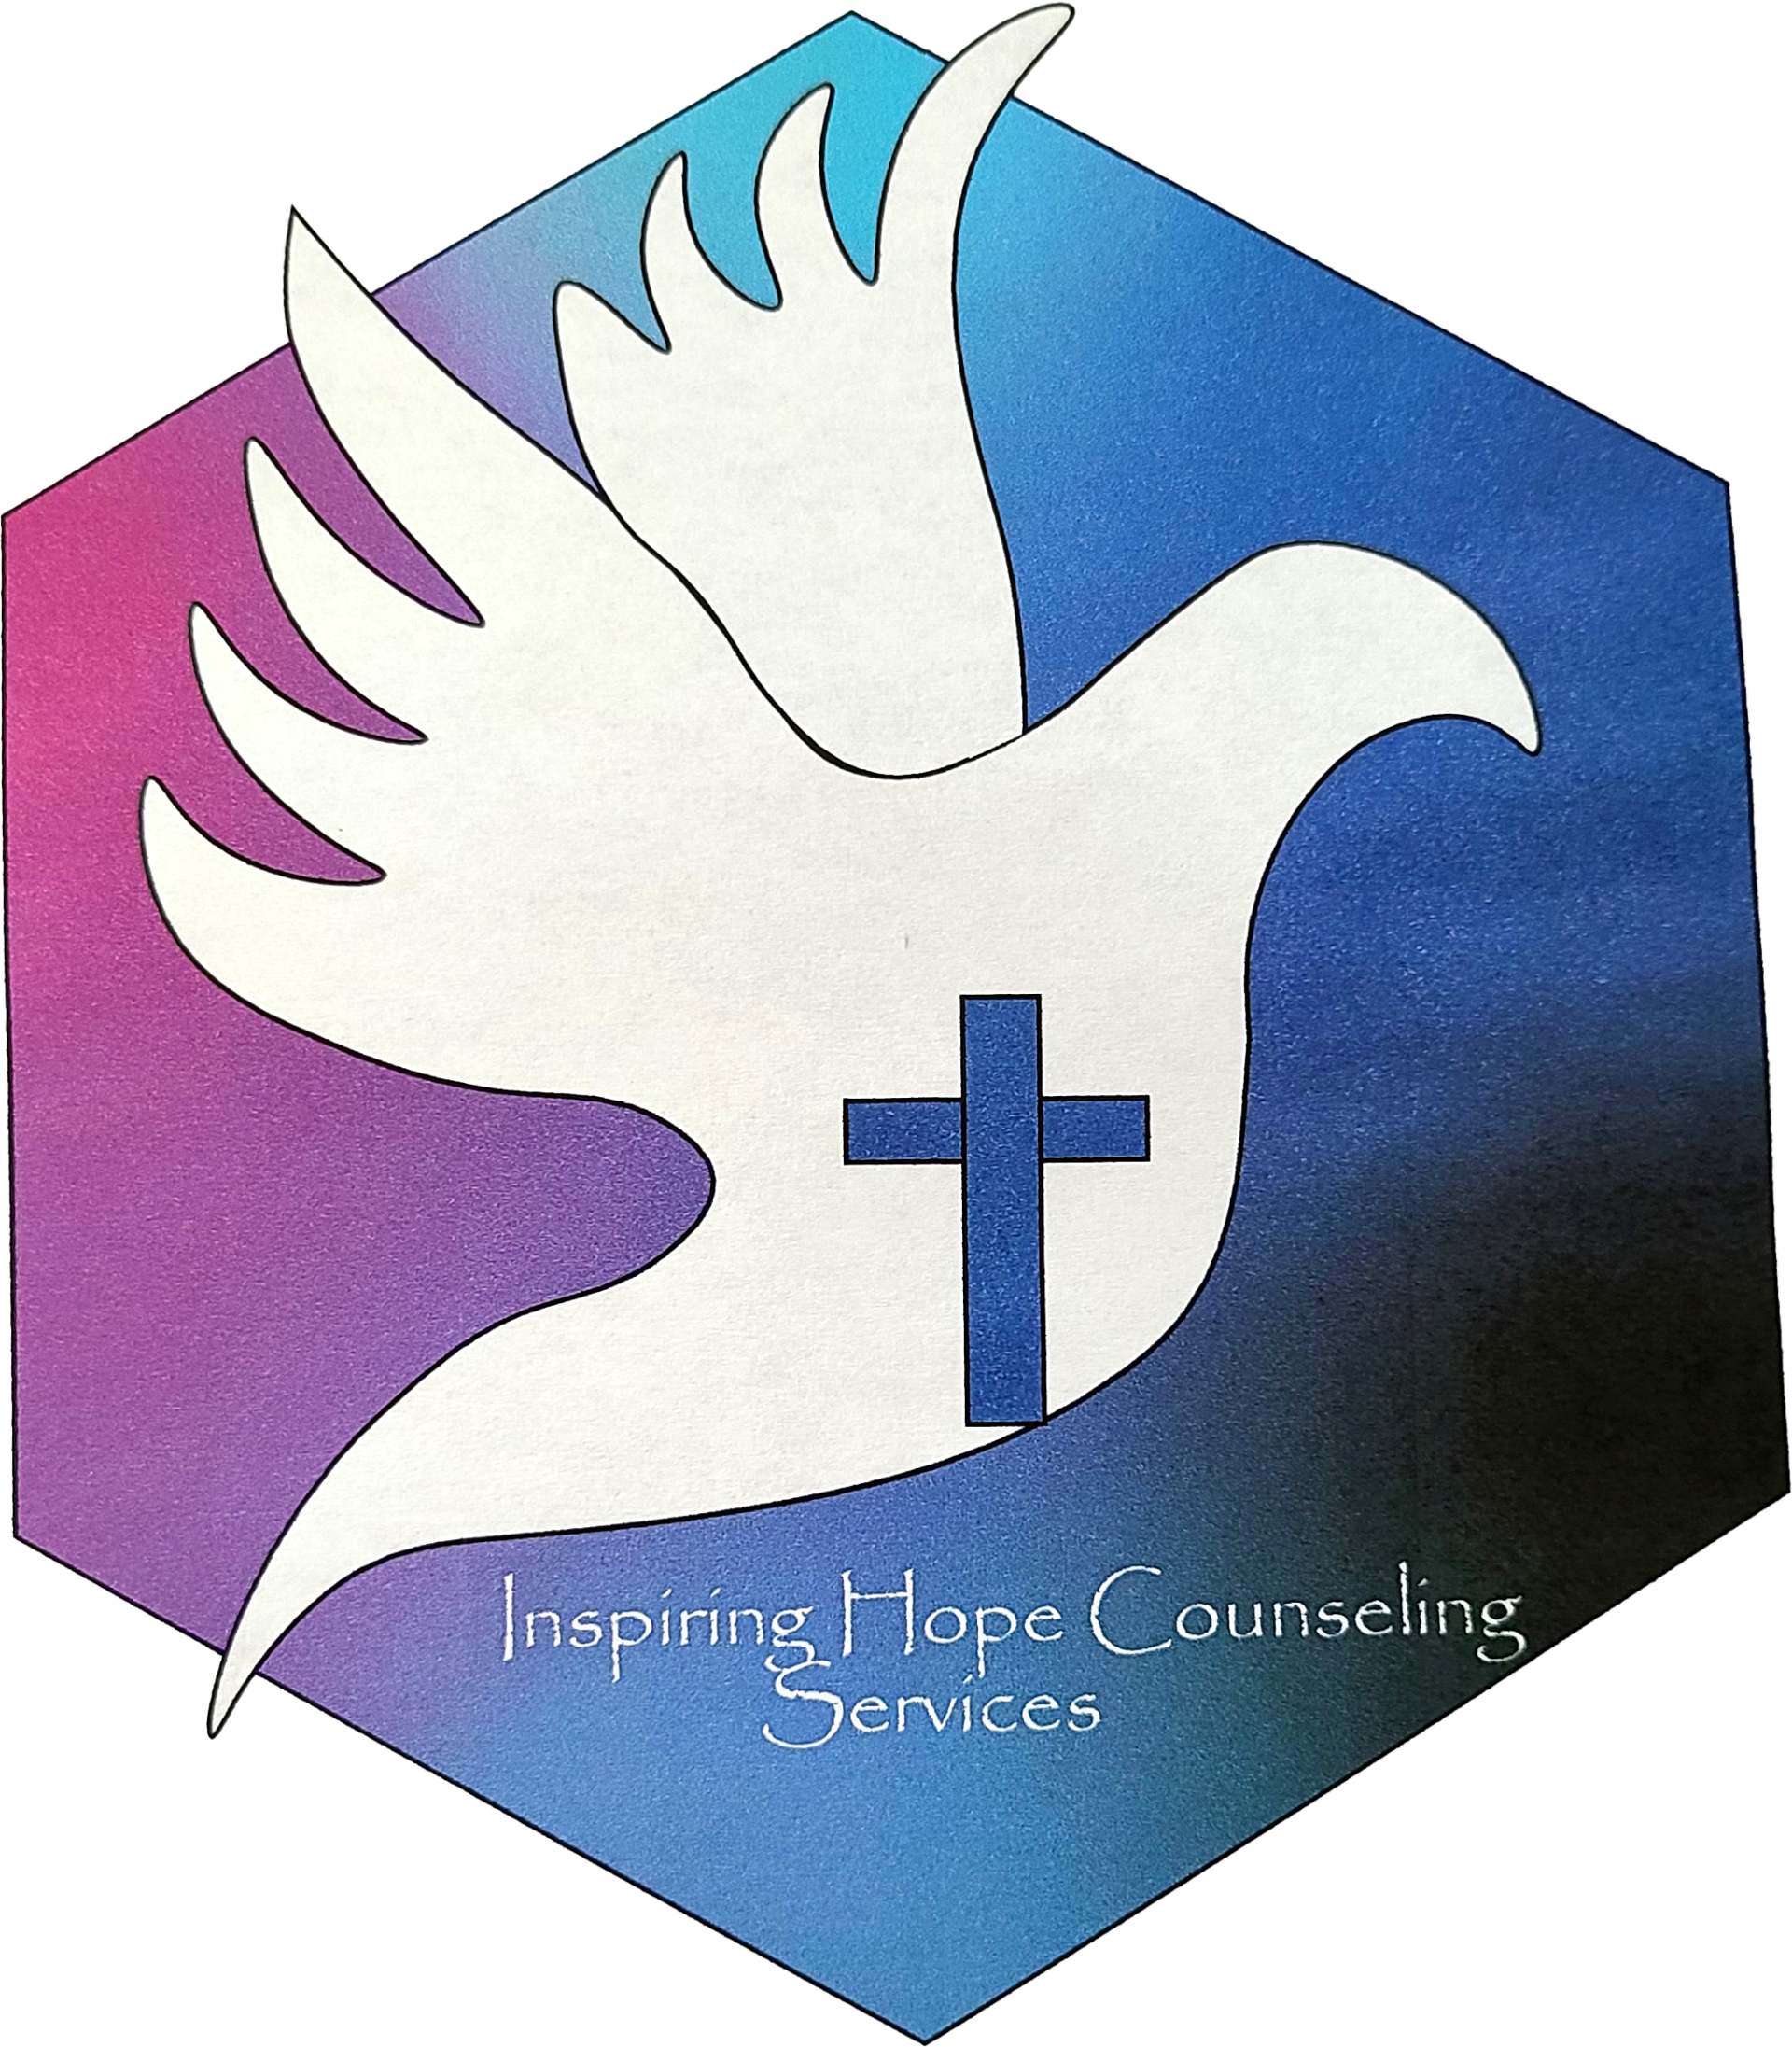 Inspiring Hope Counseling Services